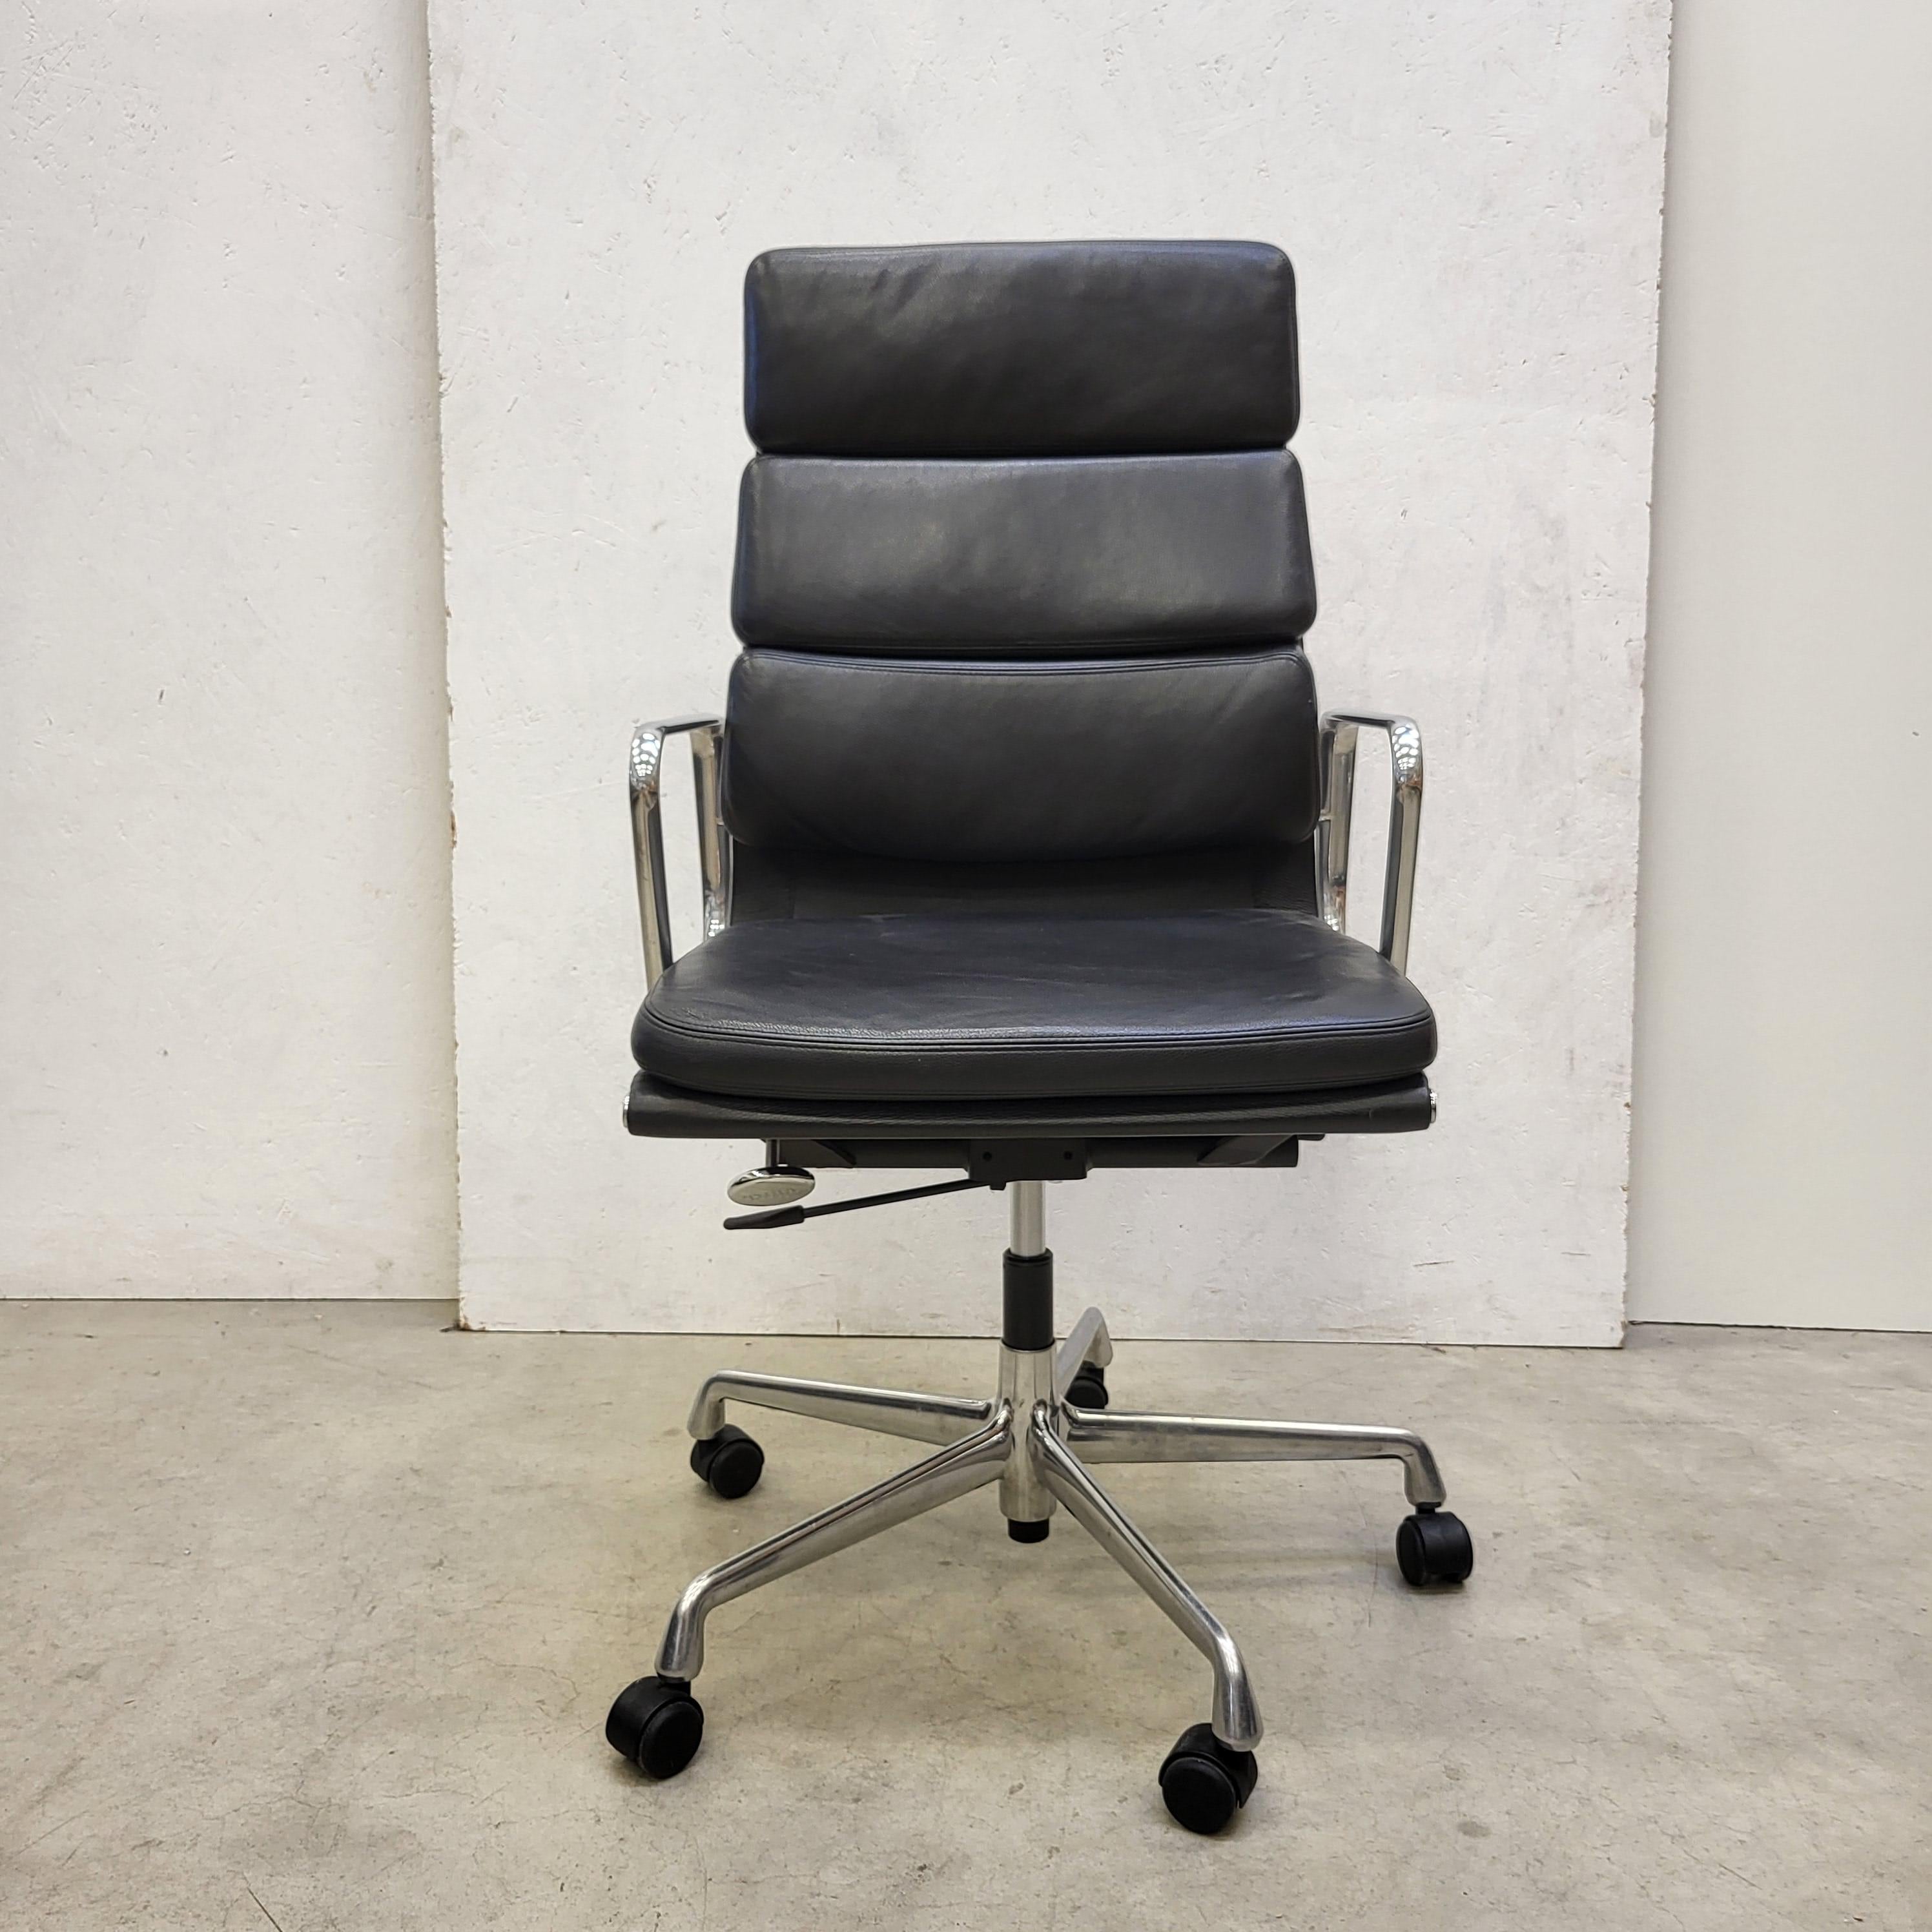 Very nice soft pad office chair model EA219 produced by Vitra. 
The chair features a polished aluminium frame and was made in 2011.
We have 4x chairs available!

The chair is height adjustable and has a tilt mechanism both of which are working very